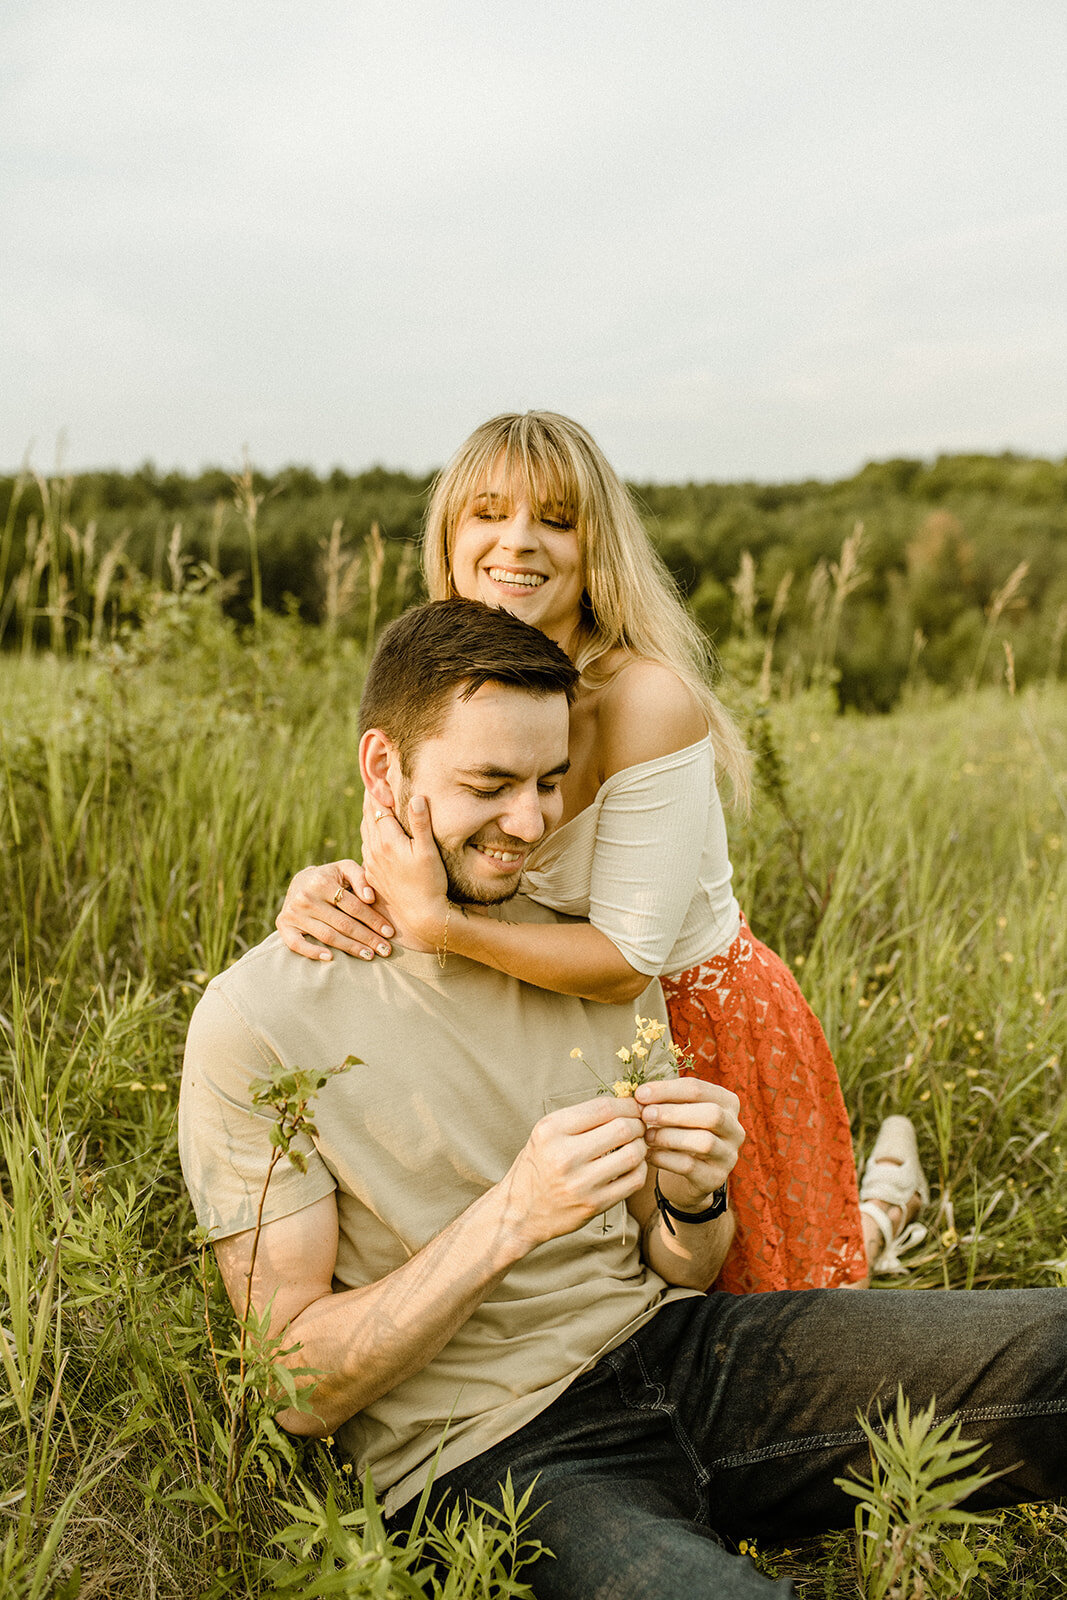 country-cut-flowers-summer-engagement-session-fun-romantic-indie-movie-wanderlust-327